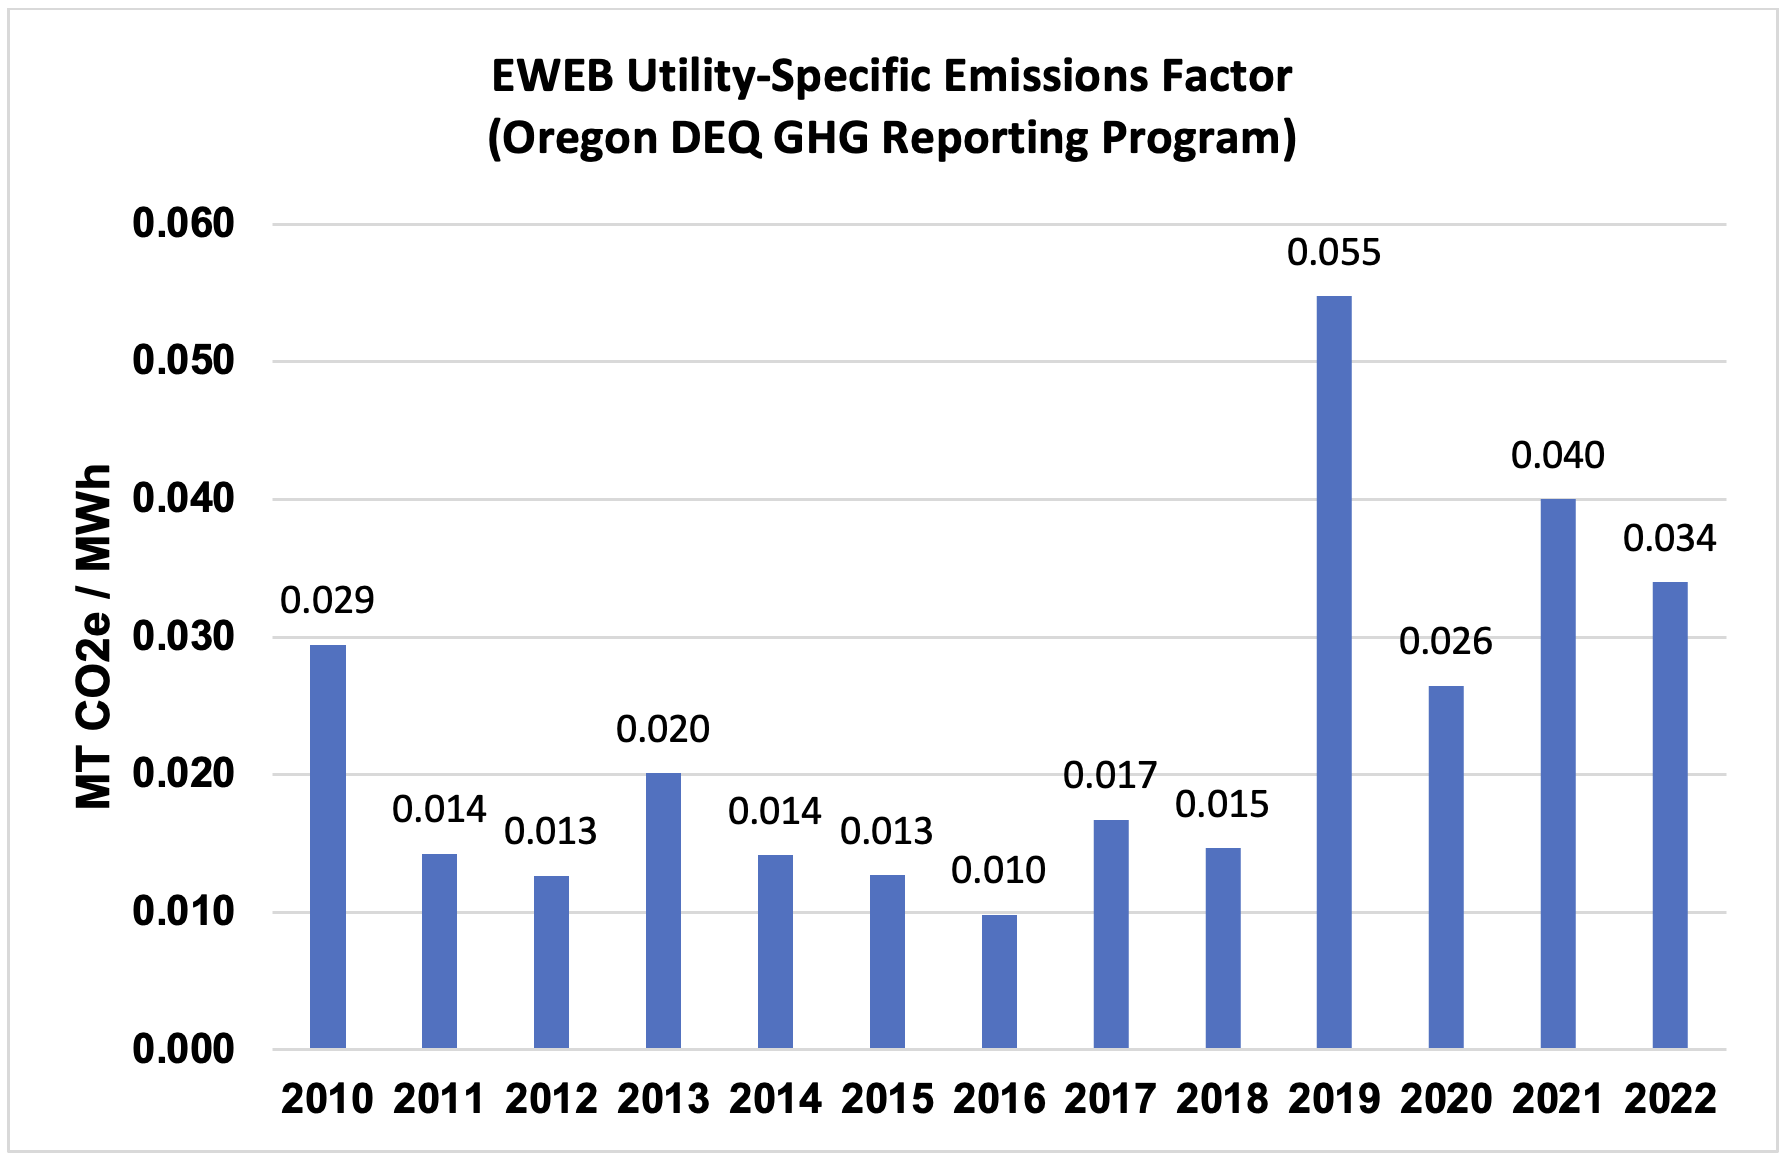 Graph of: Oregon Department of Environmental Quality EWEB Utility-Specific Emissions factors, 2010-2022